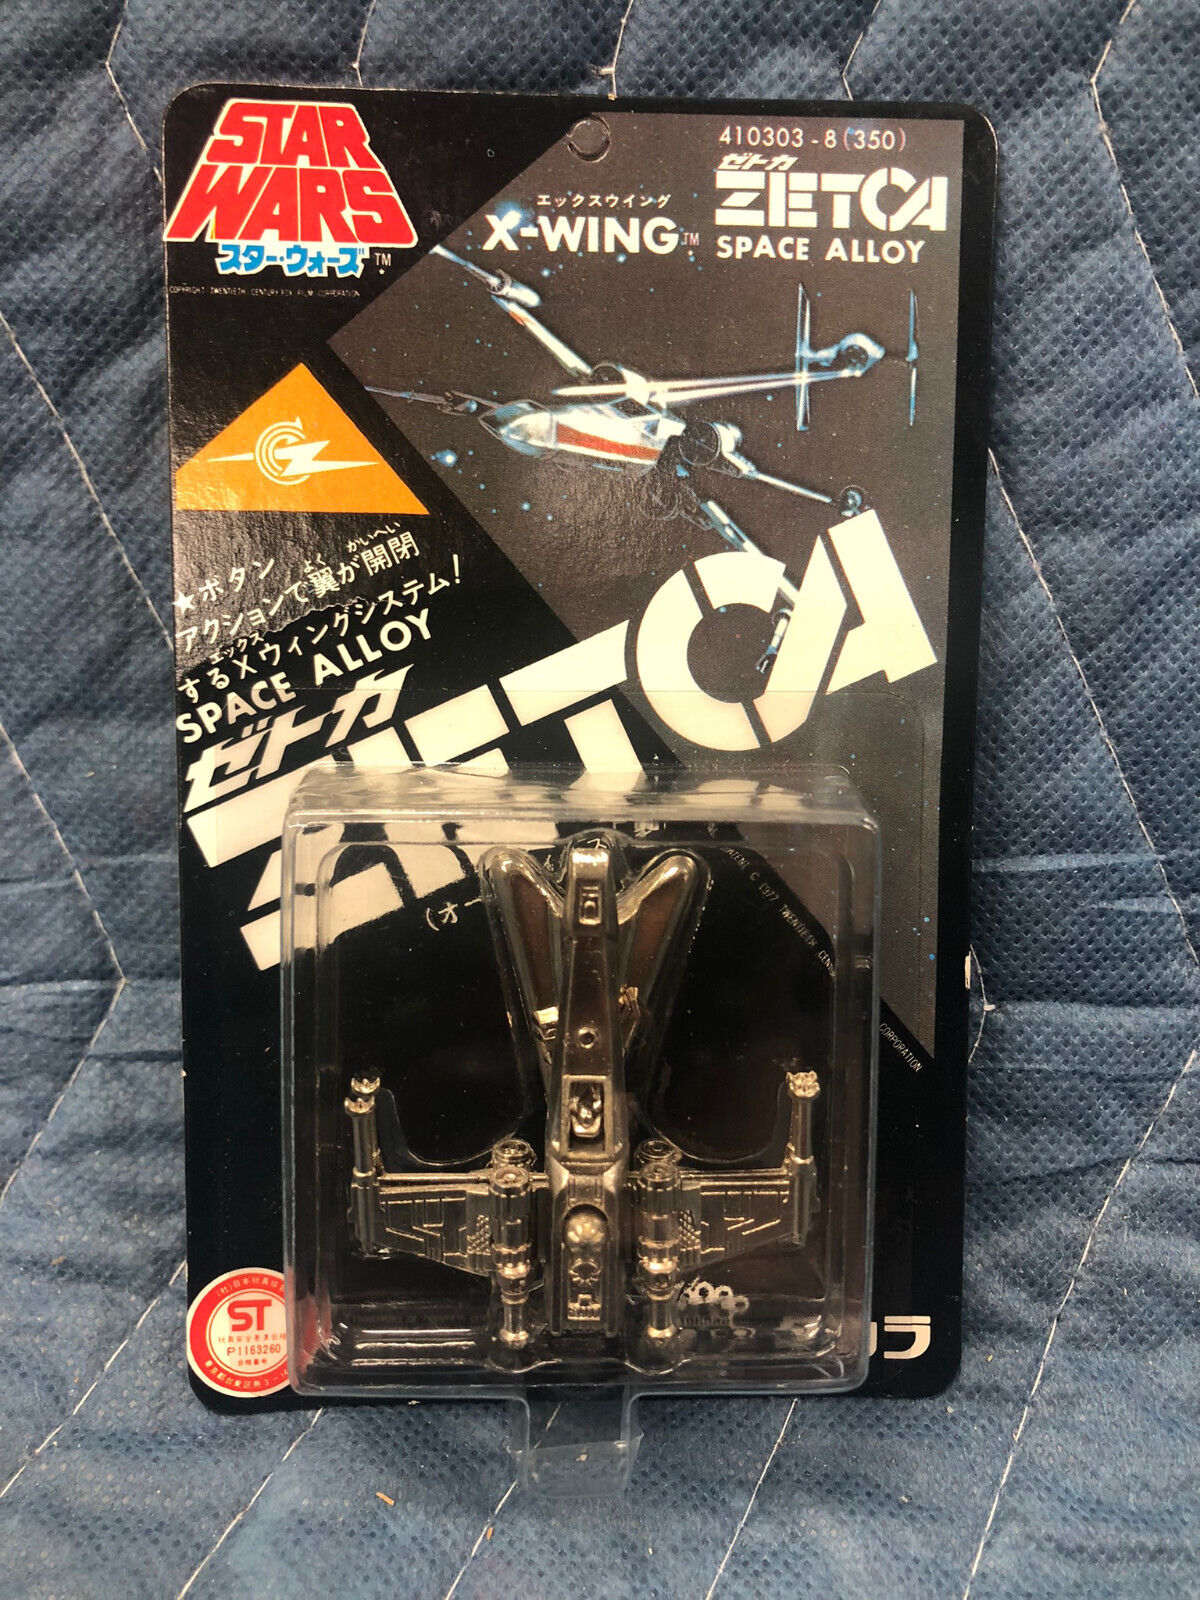 Ultra Rare Vintage Zetca Space Alloy Star Wars X Wing fighter Takara unpunched